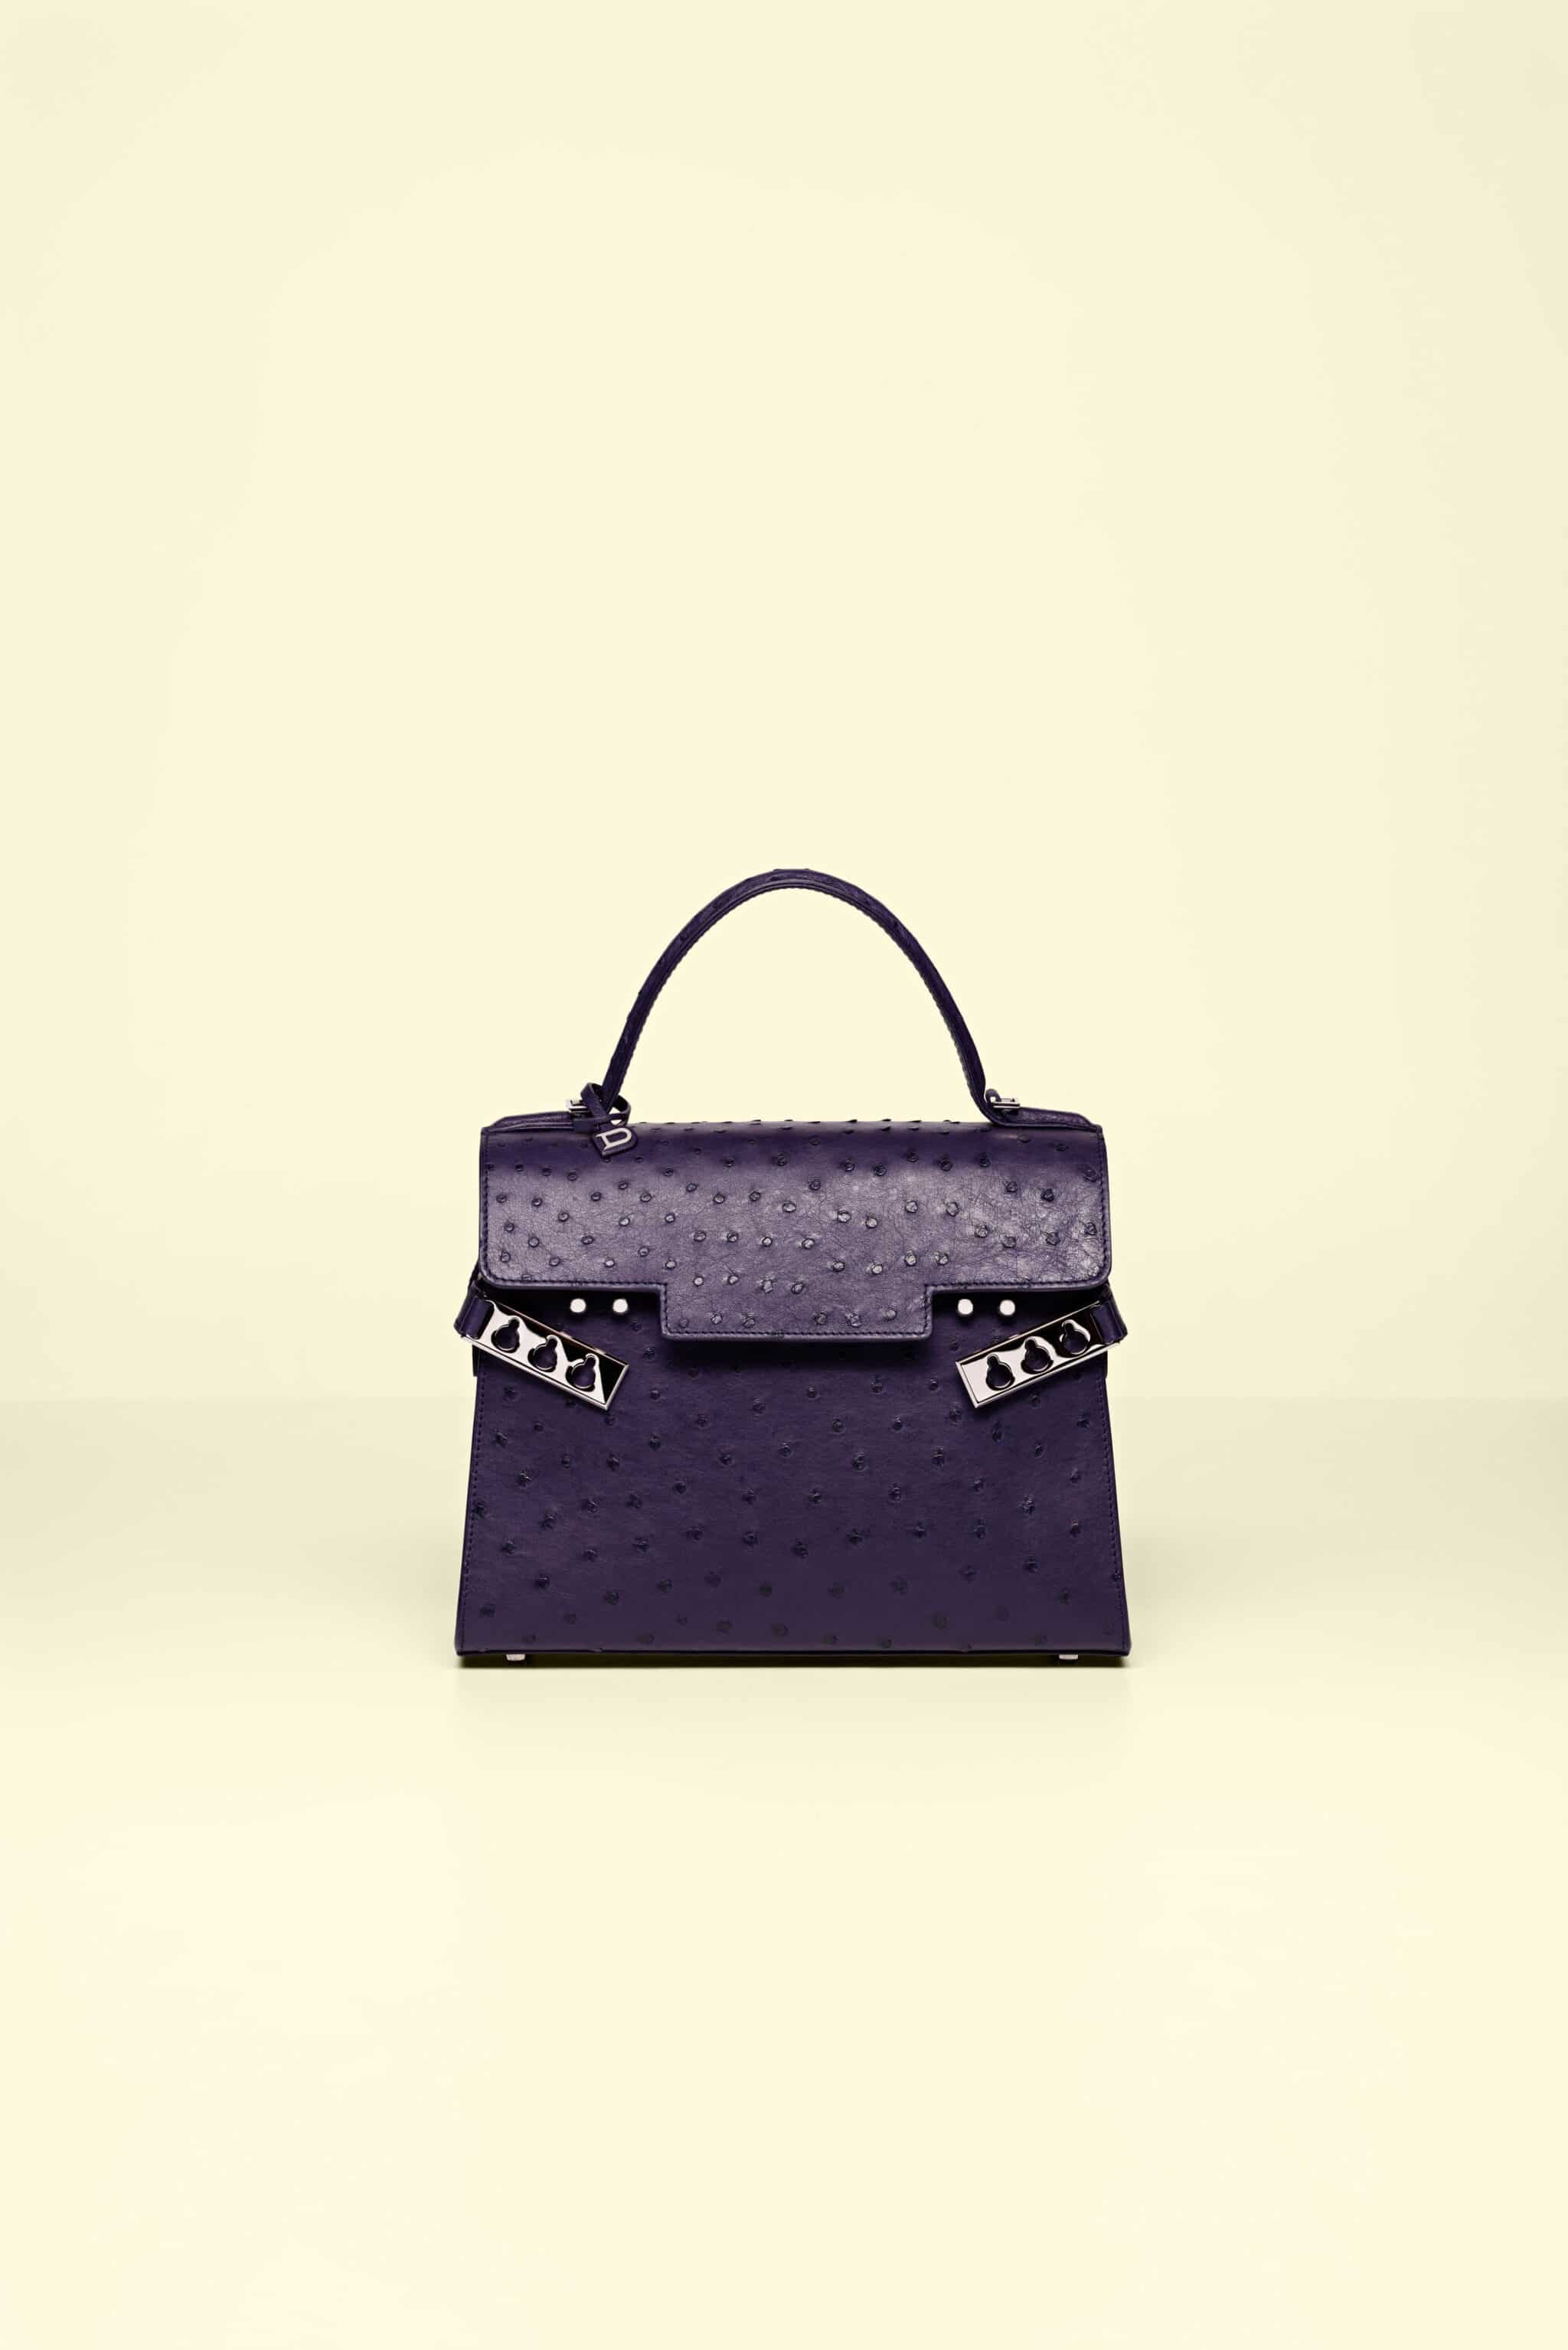 Delvaux Spring/Summer 2017 Bag Collection - Spotted Fashion